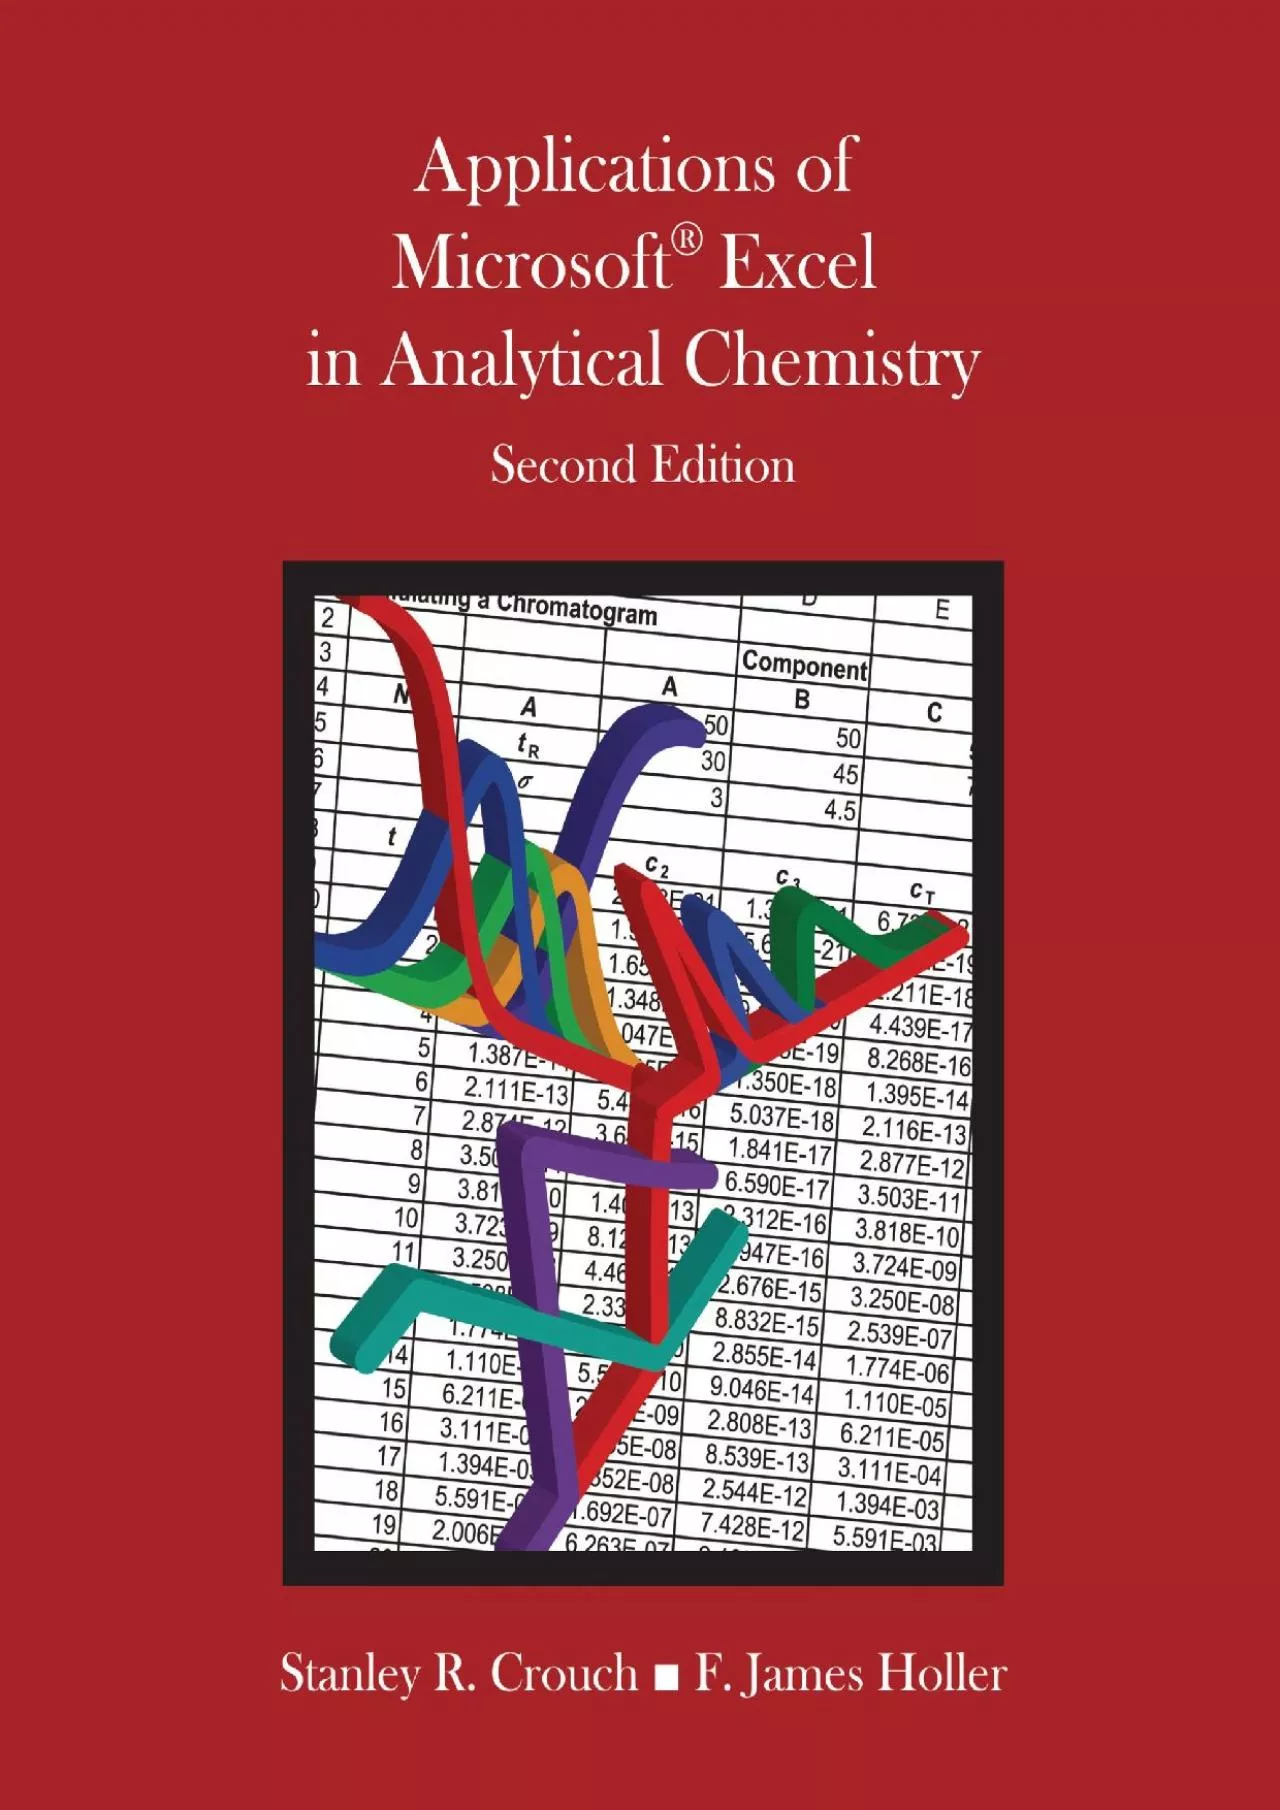 (BOOK)-Applications of Microsoft Excel in Analytical Chemistry